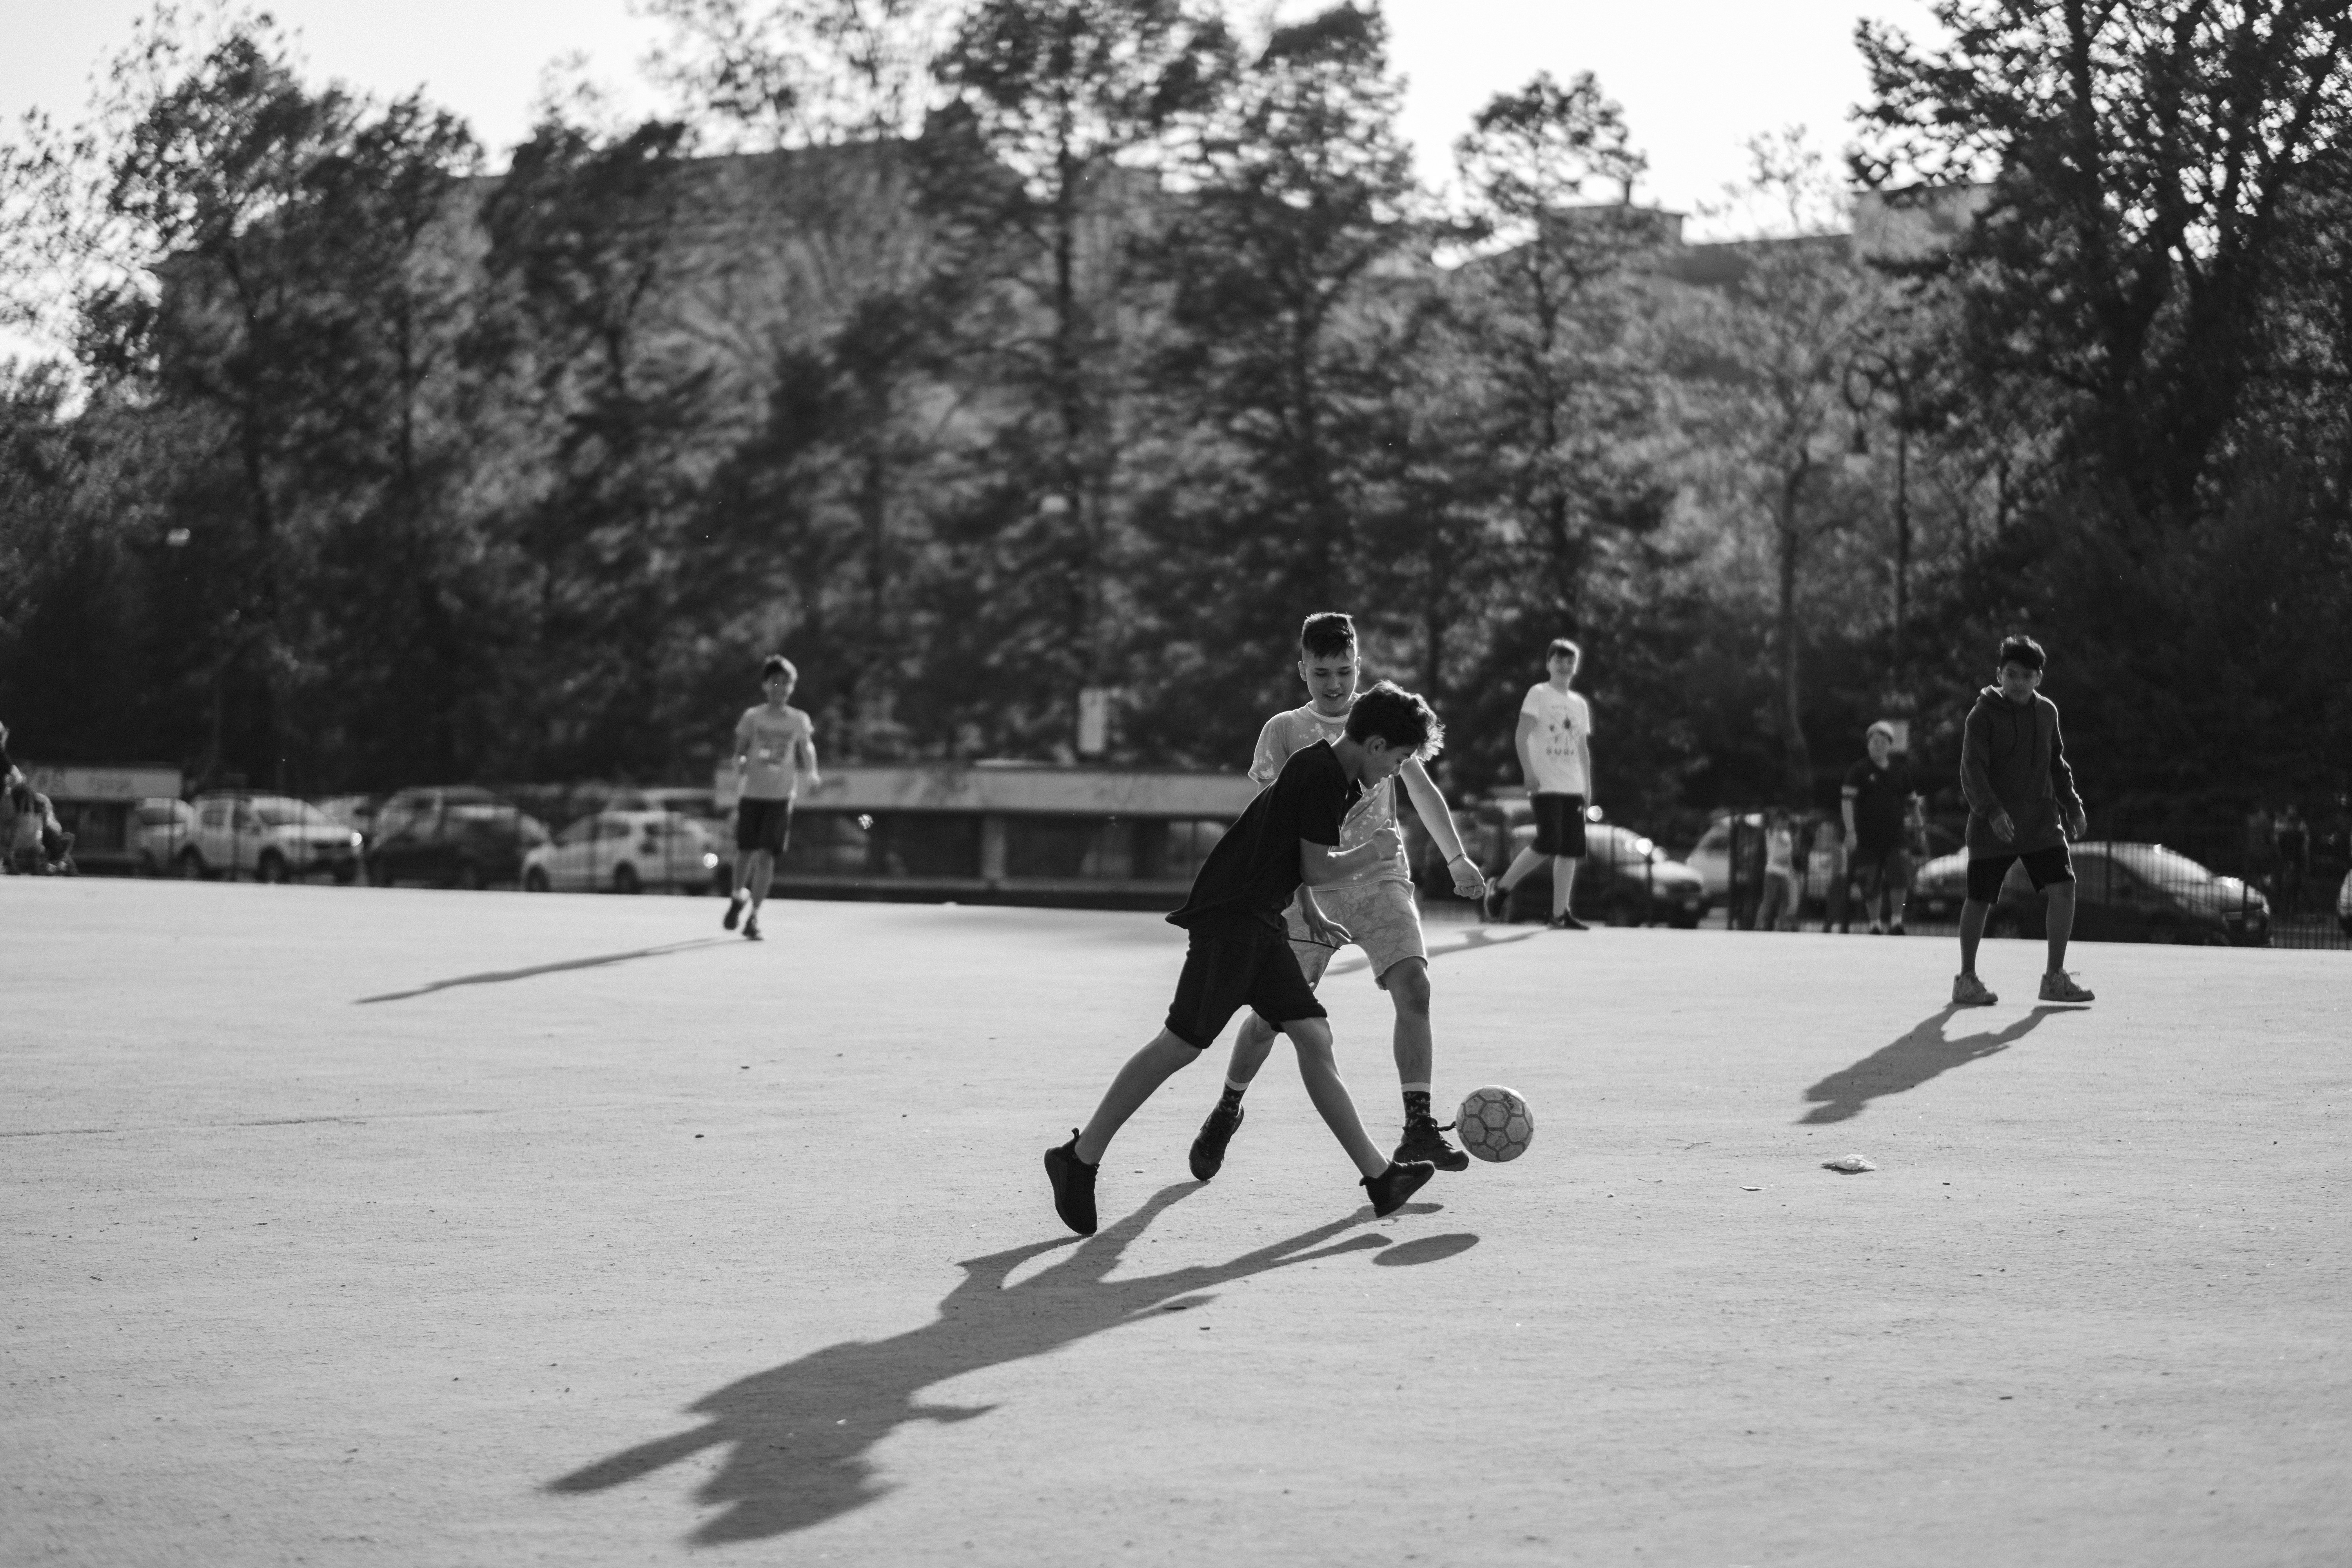 While I was walking with my camera I saw this guys playing football and i decided to shoot this simple but important scene of everyday life.